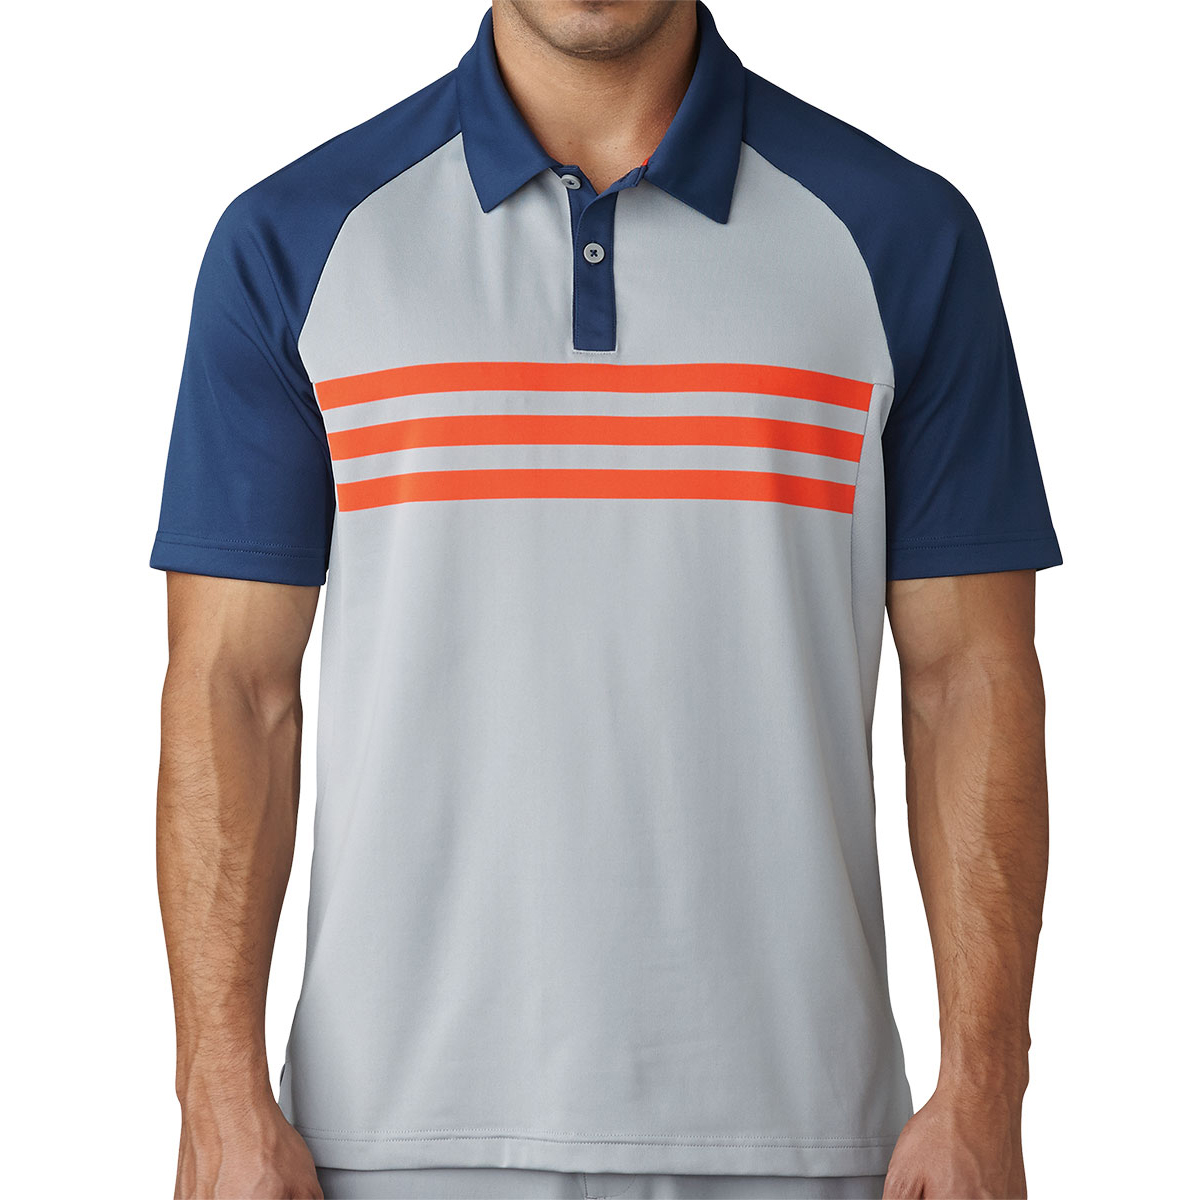 adidas Golf climacool 3 Stripe Competition Polo Shirt from american golf